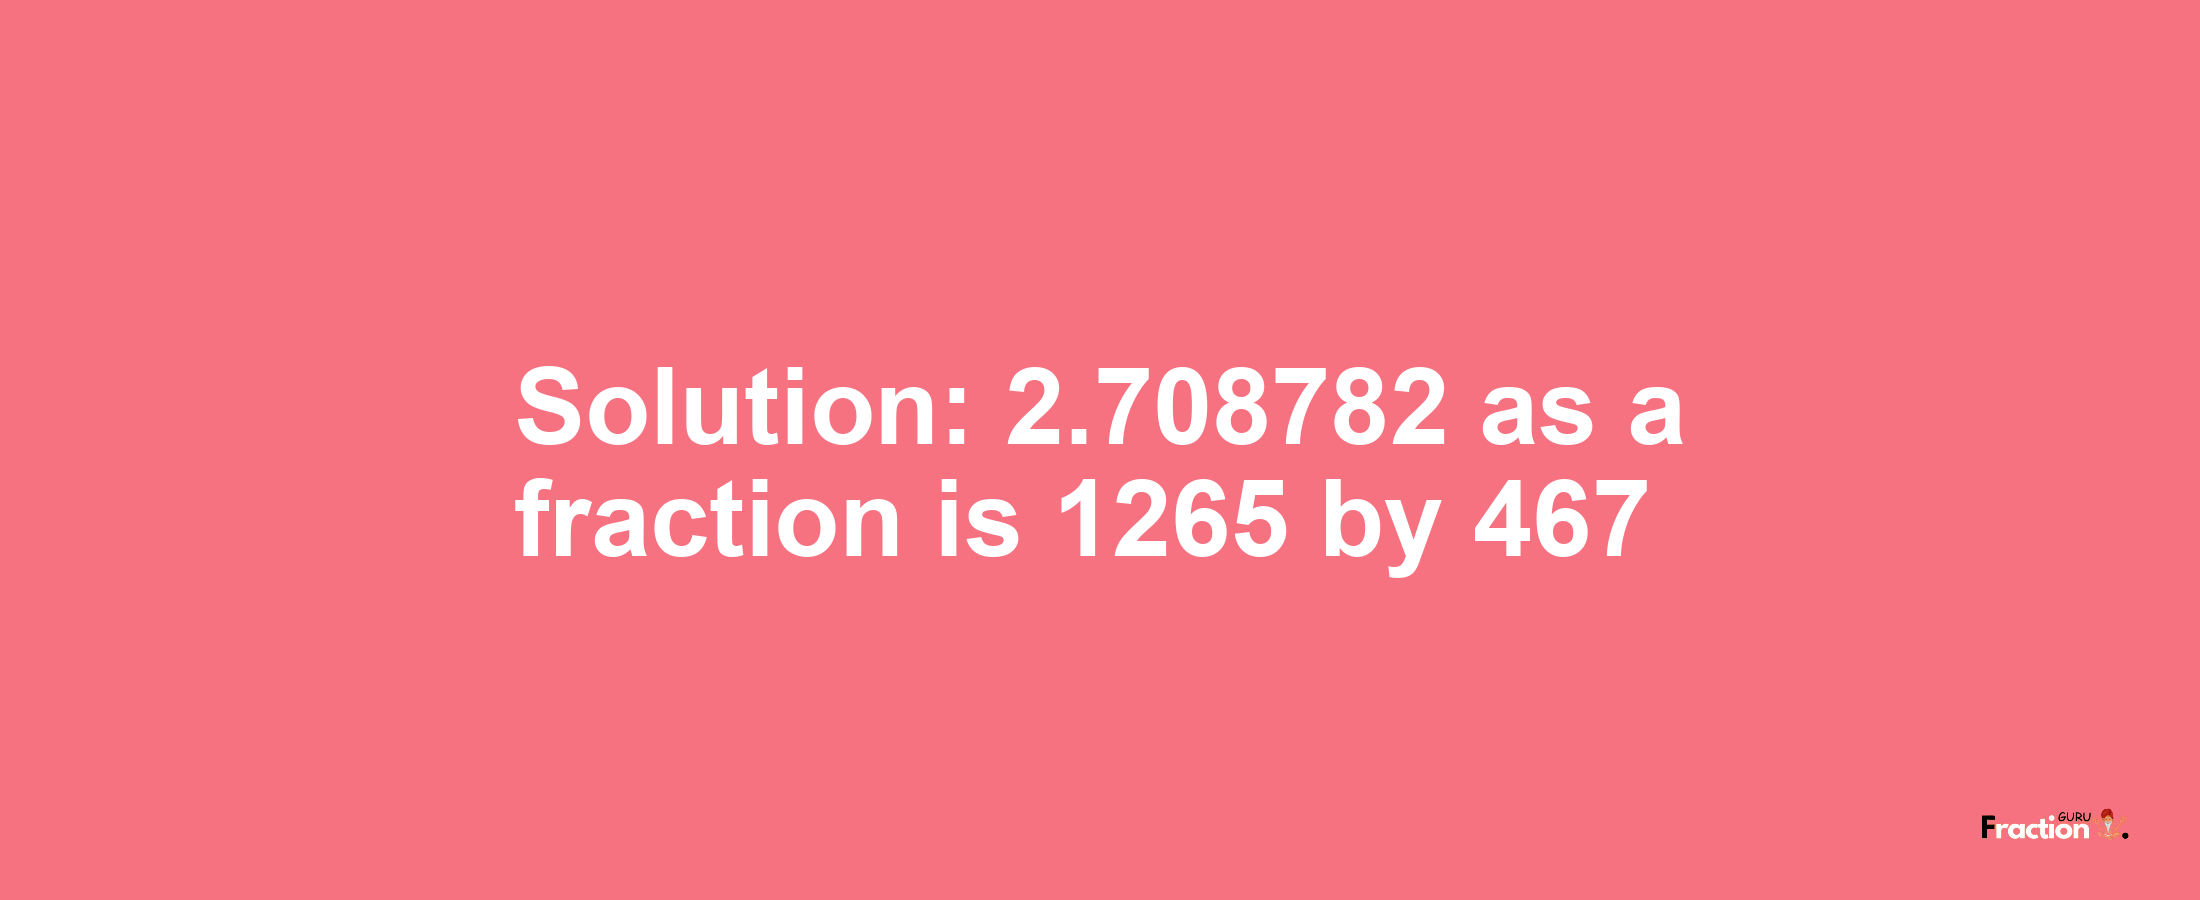 Solution:2.708782 as a fraction is 1265/467